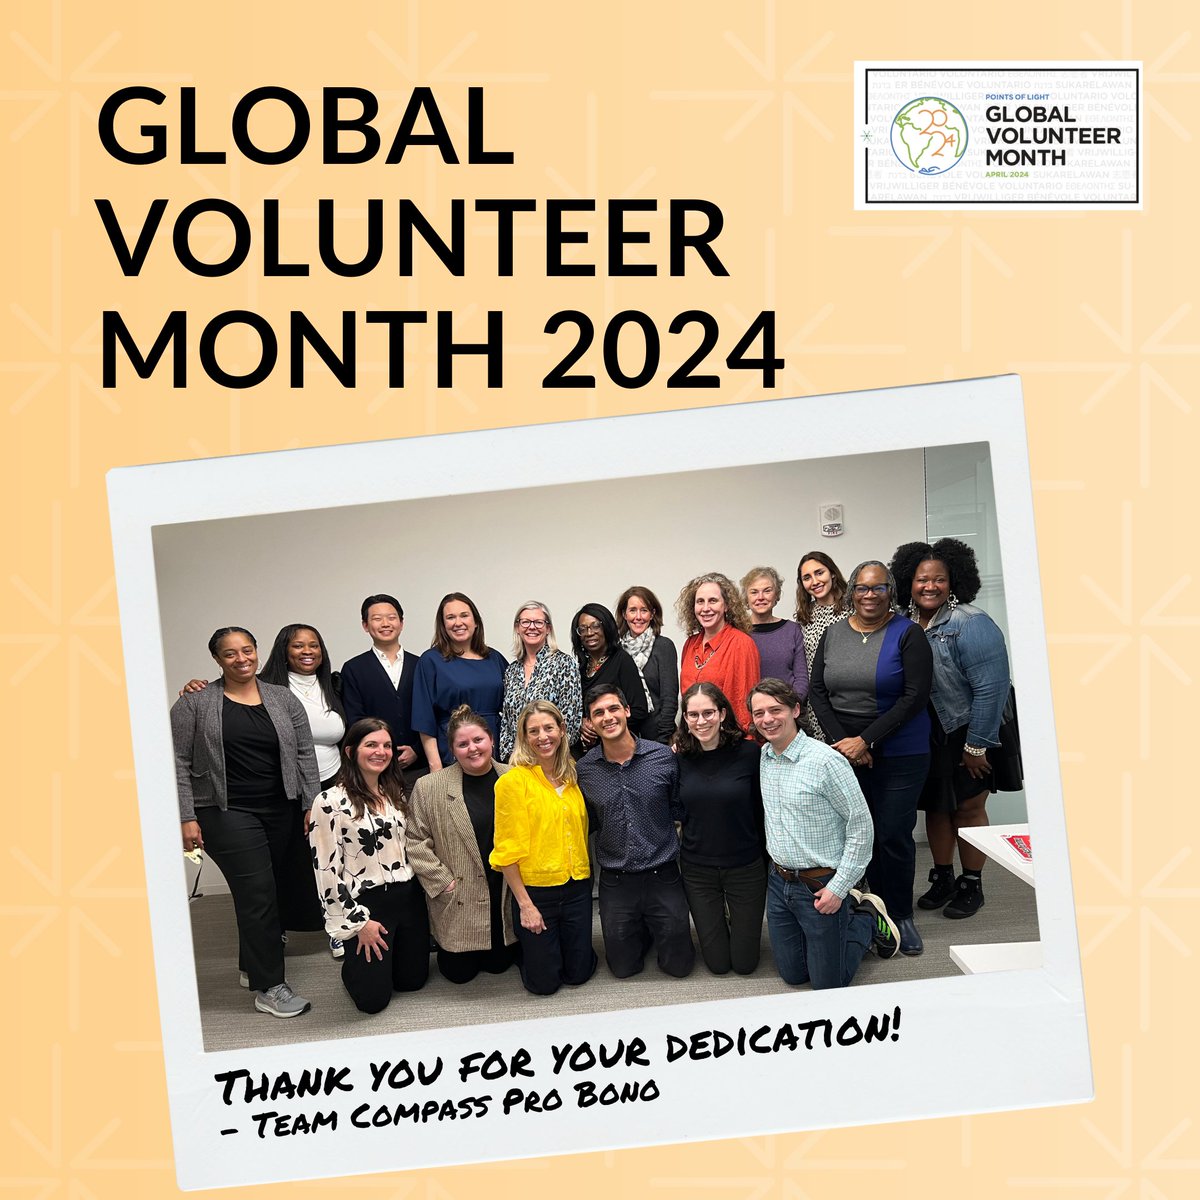 Happy #GlobalVolunteerMonth! This month we're especially excited to celebrate and shout out our inspiring volunteers. Since 2001, our volunteers have donated tens of thousands of hours towards supporting local nonprofits. @PointsofLight